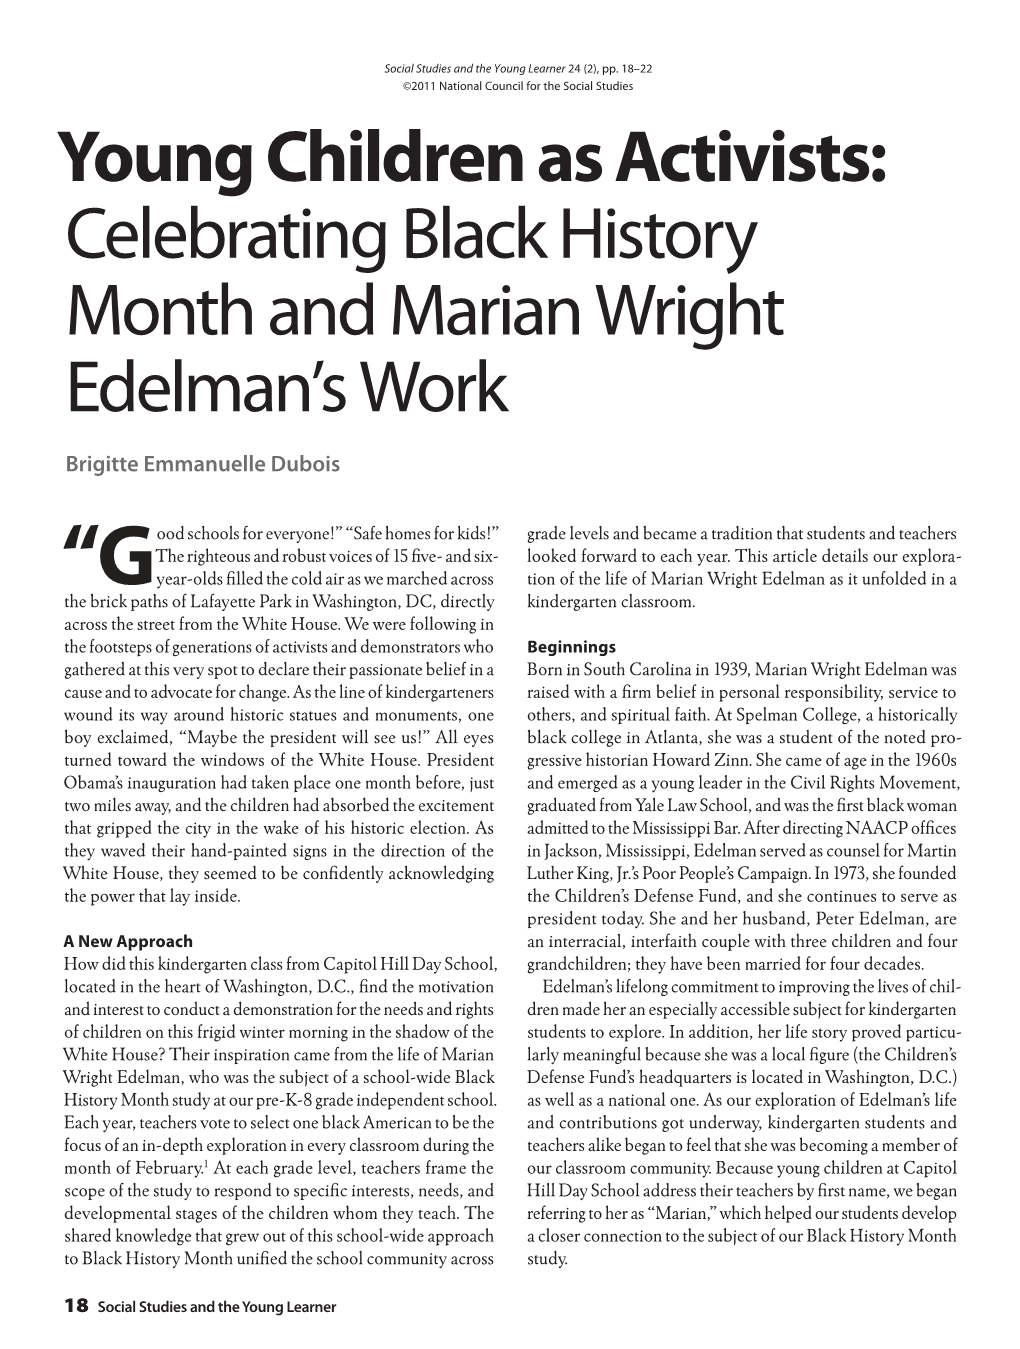 Celebrating Black History Month and Marian Wright Edelman's Work